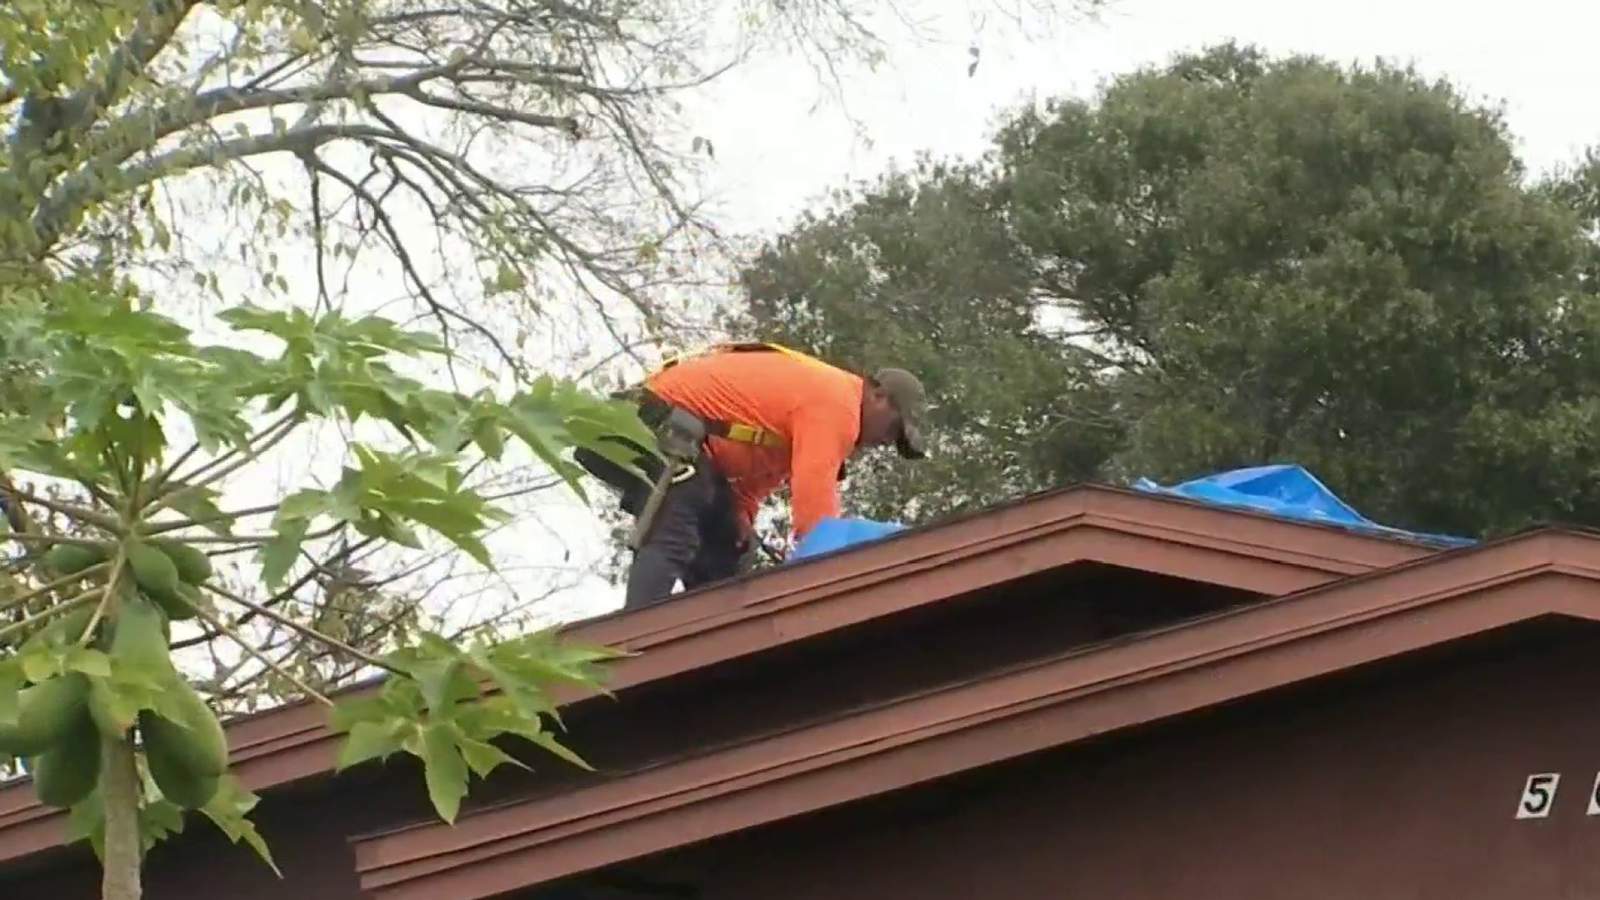 No more tarps: Cocoa Army veteran gets new roof after Hurricane Irma damaged his